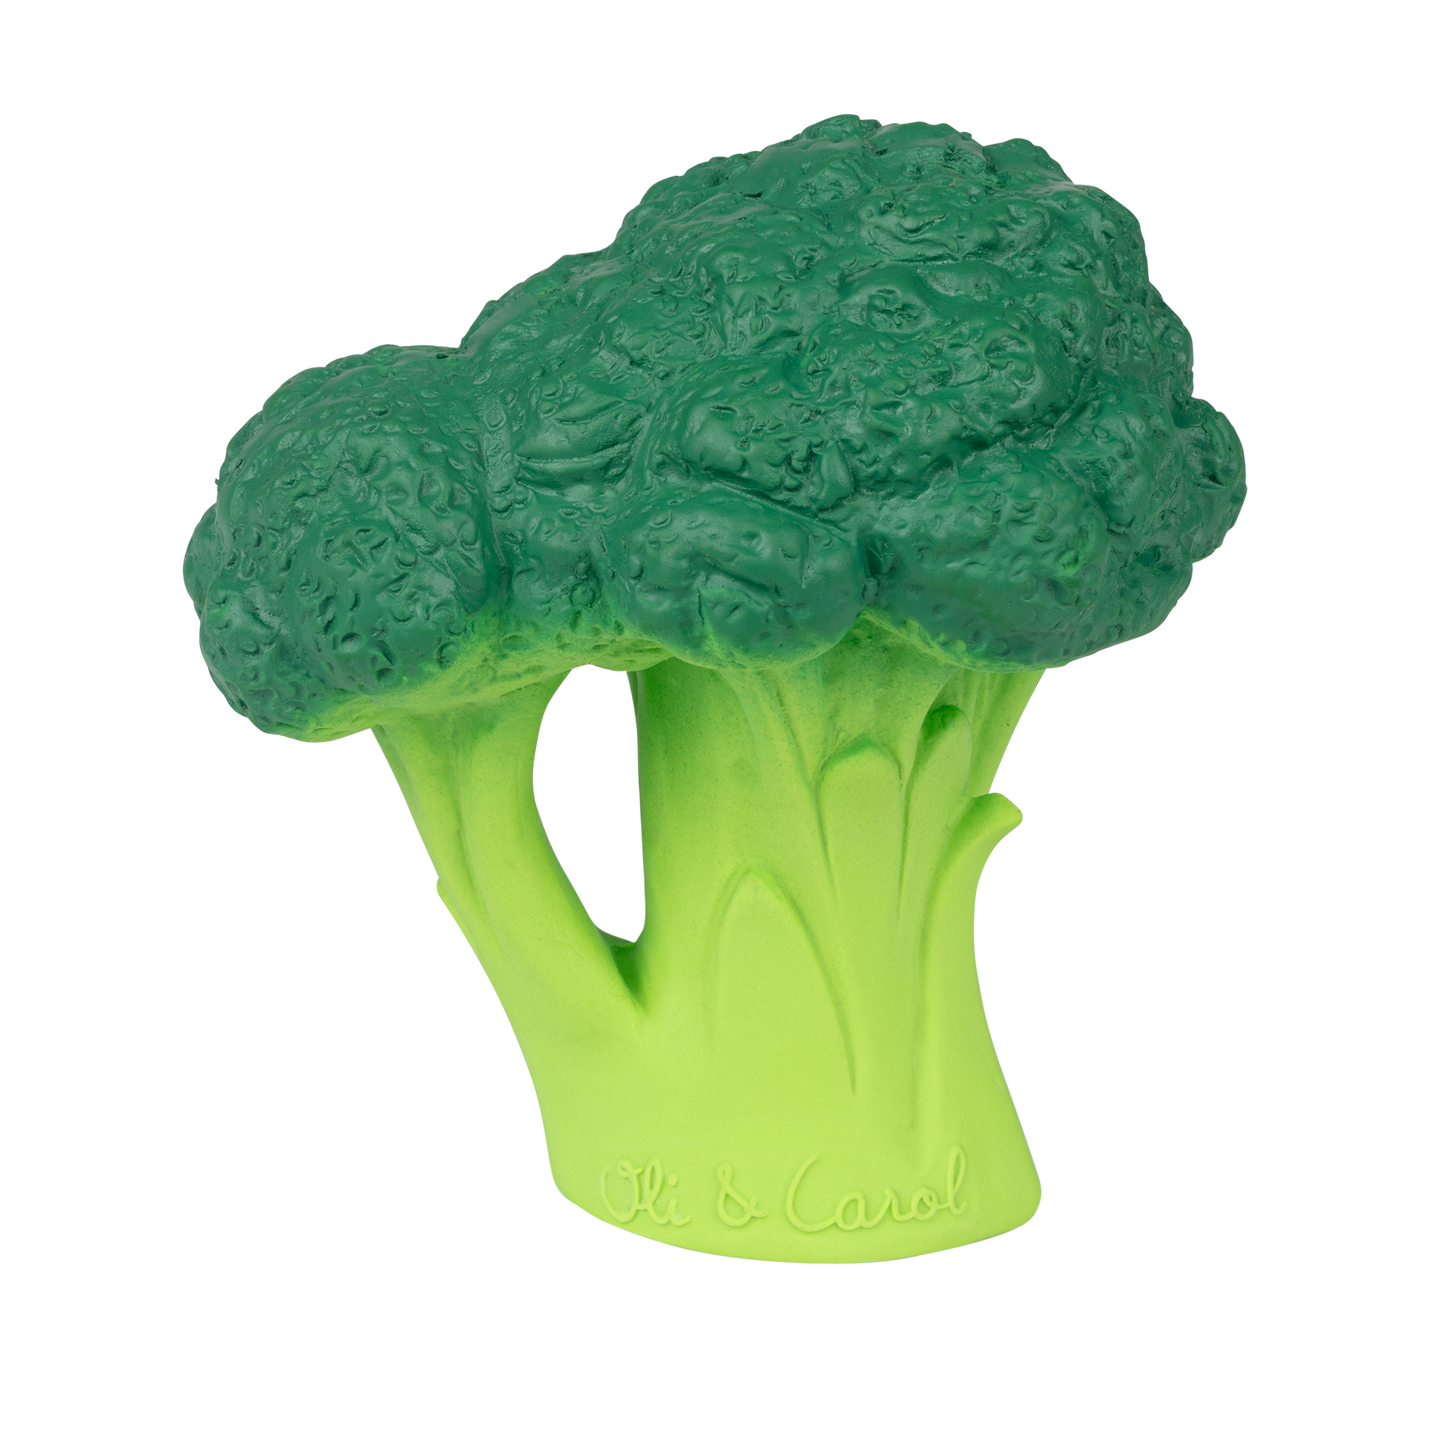 Brucy the Broccoli 100% natural rubber teether and bath toy